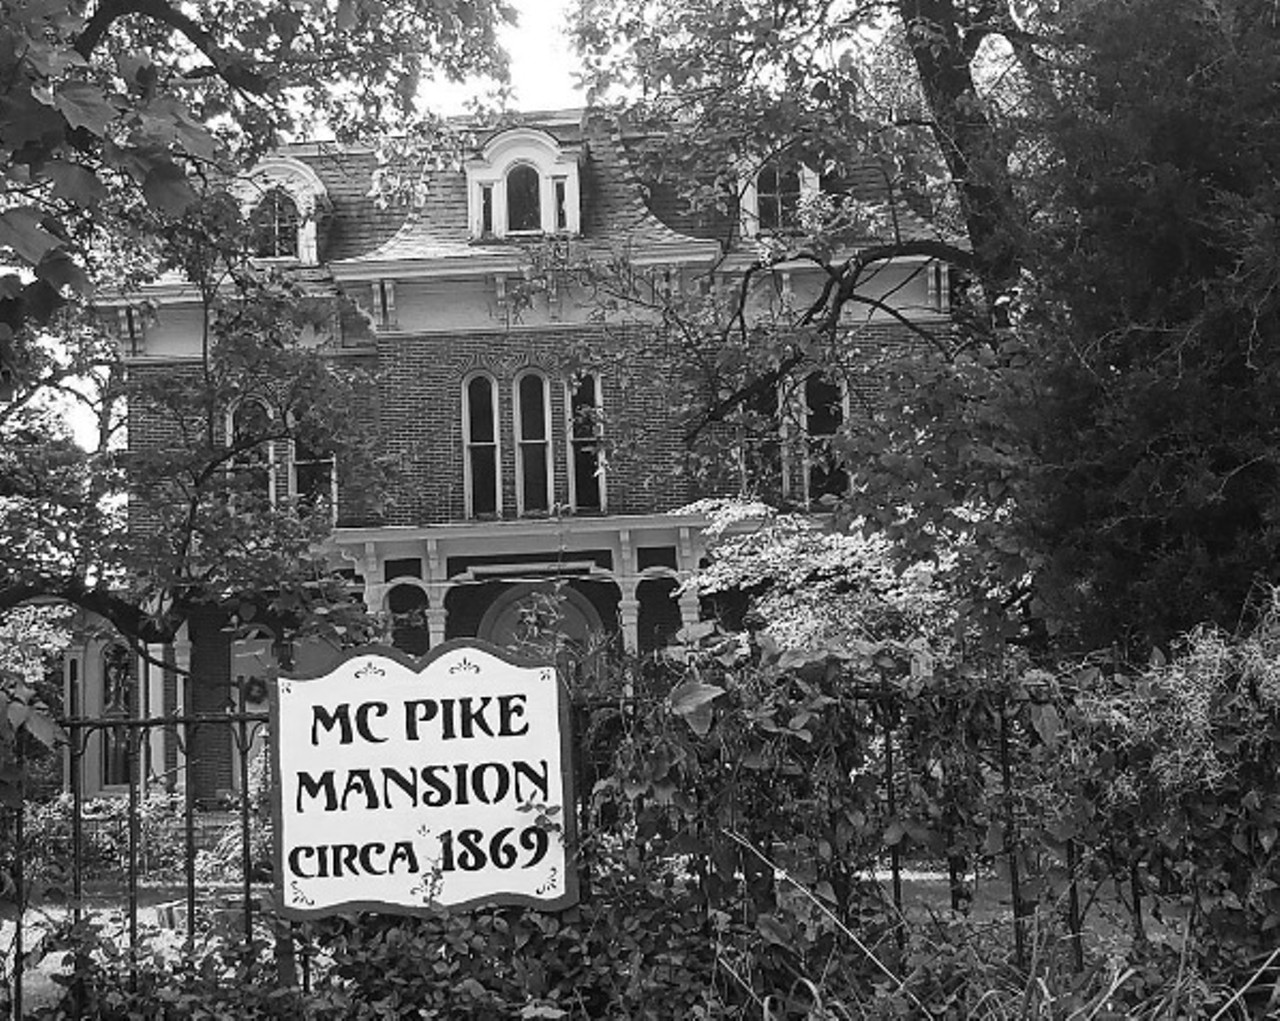 The McPike Mansion
2018 Alby St. 
Alton, IL 62002
Built in 1869, the McPike Mansion holds status on the National Register of Historic Places. But until 1936, it was the home of the McPike family -- and rumor has it that the family still dwells at the house today. According to the McPike Mansion website, "It is not uncommon to find in photos of the mansion, orbs, balls of light, even figures appearing in the windows that were not seen by the human eye when the photo was taken." People also claim to have seen mysterious lights or figures in the windows. Photo courtesy of Instagram / kyliecoyotea.